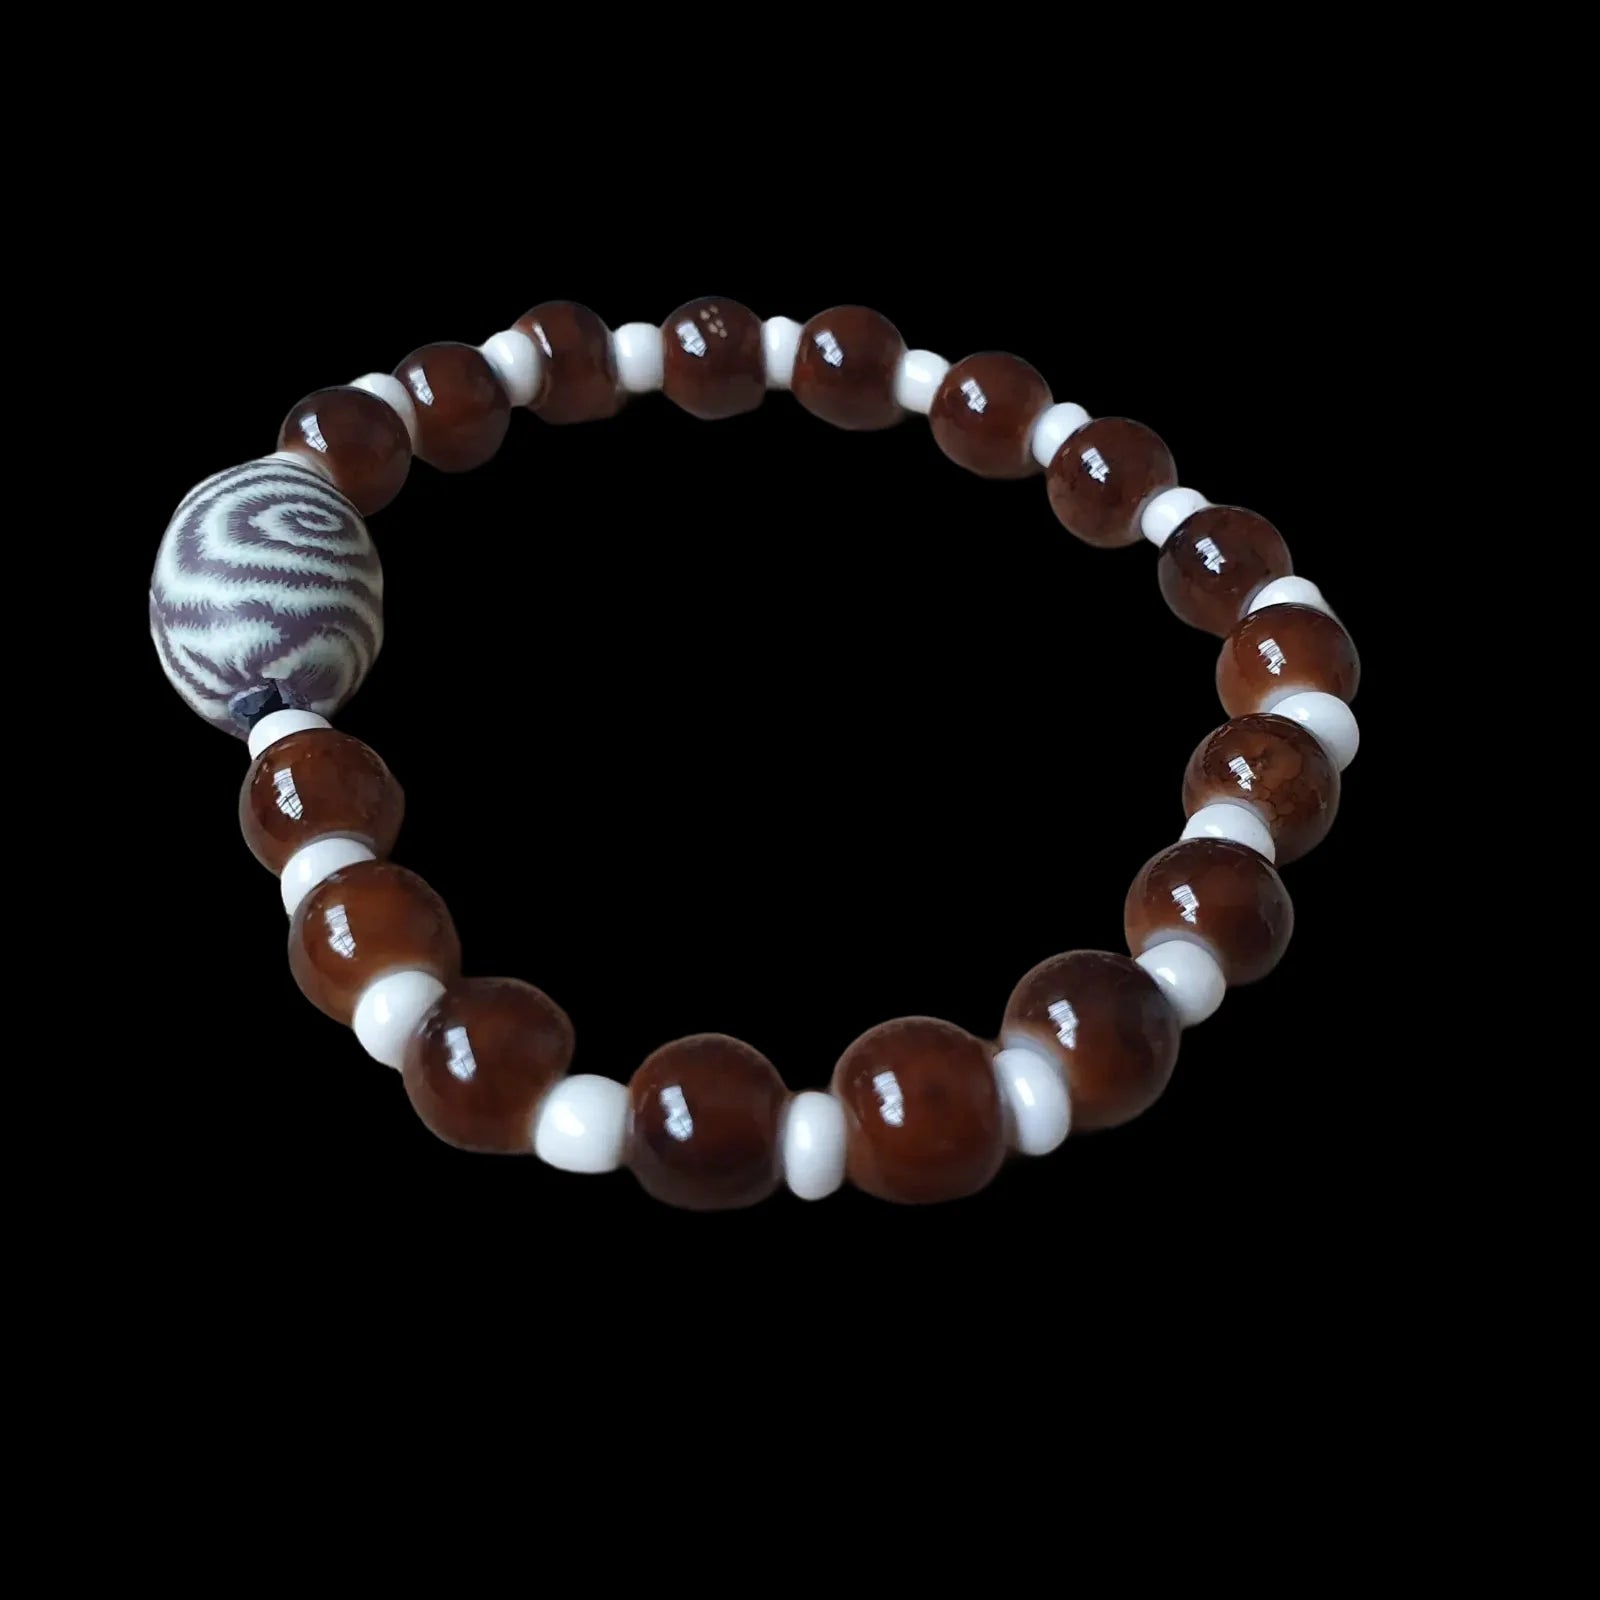 Unique Handmade Crafted Beaded Stretch Bracelet Gift